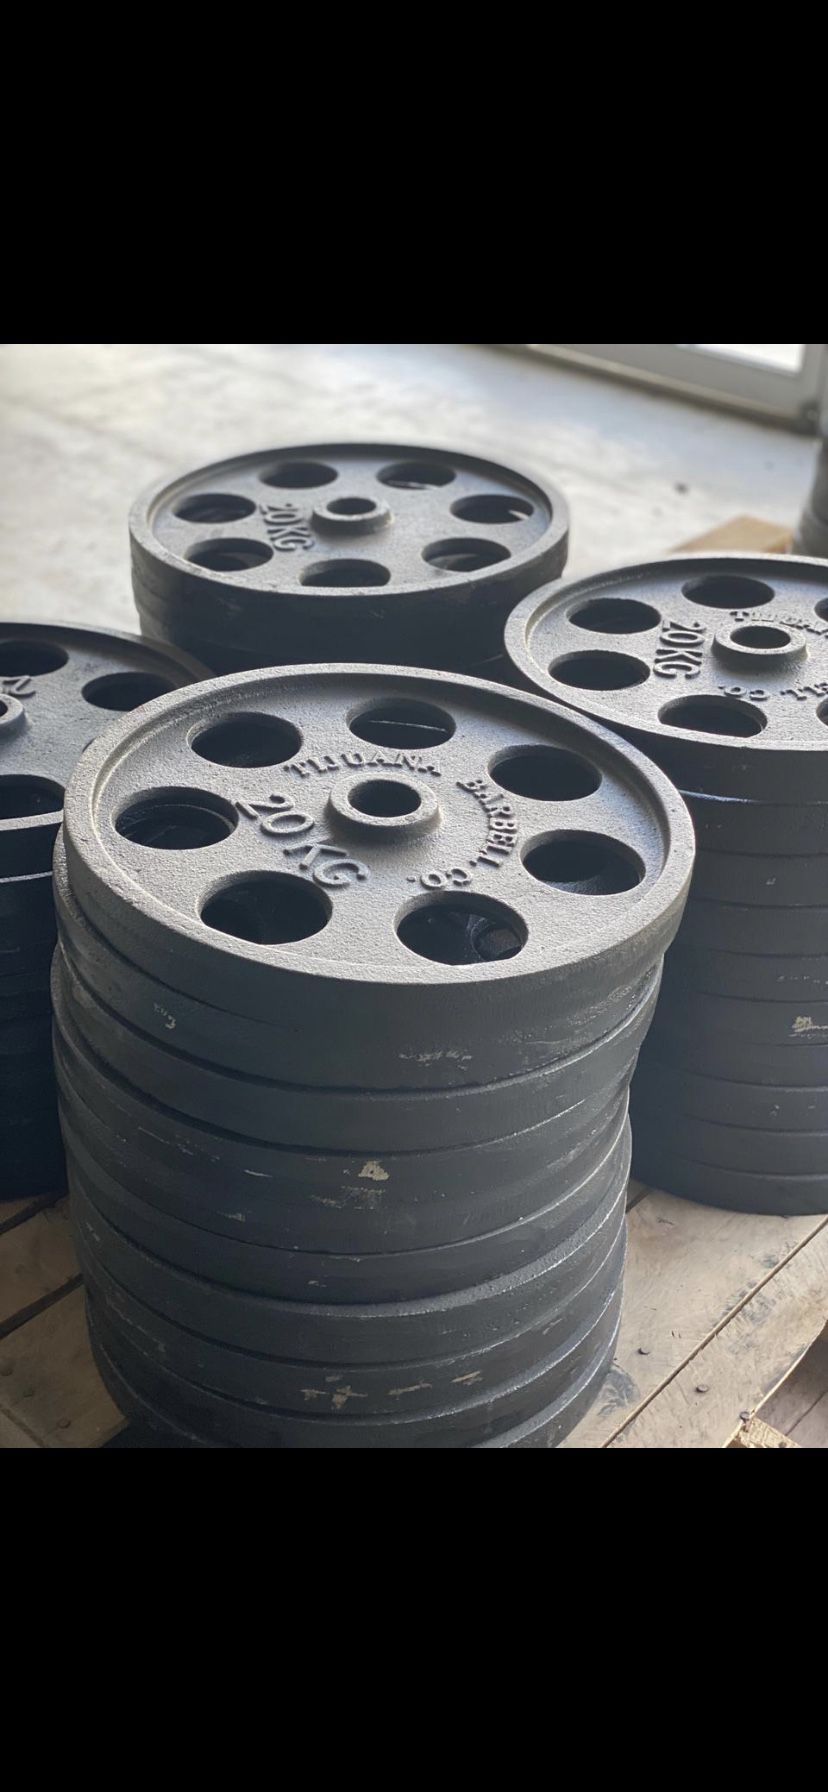 20 kg Olympic size weights plates